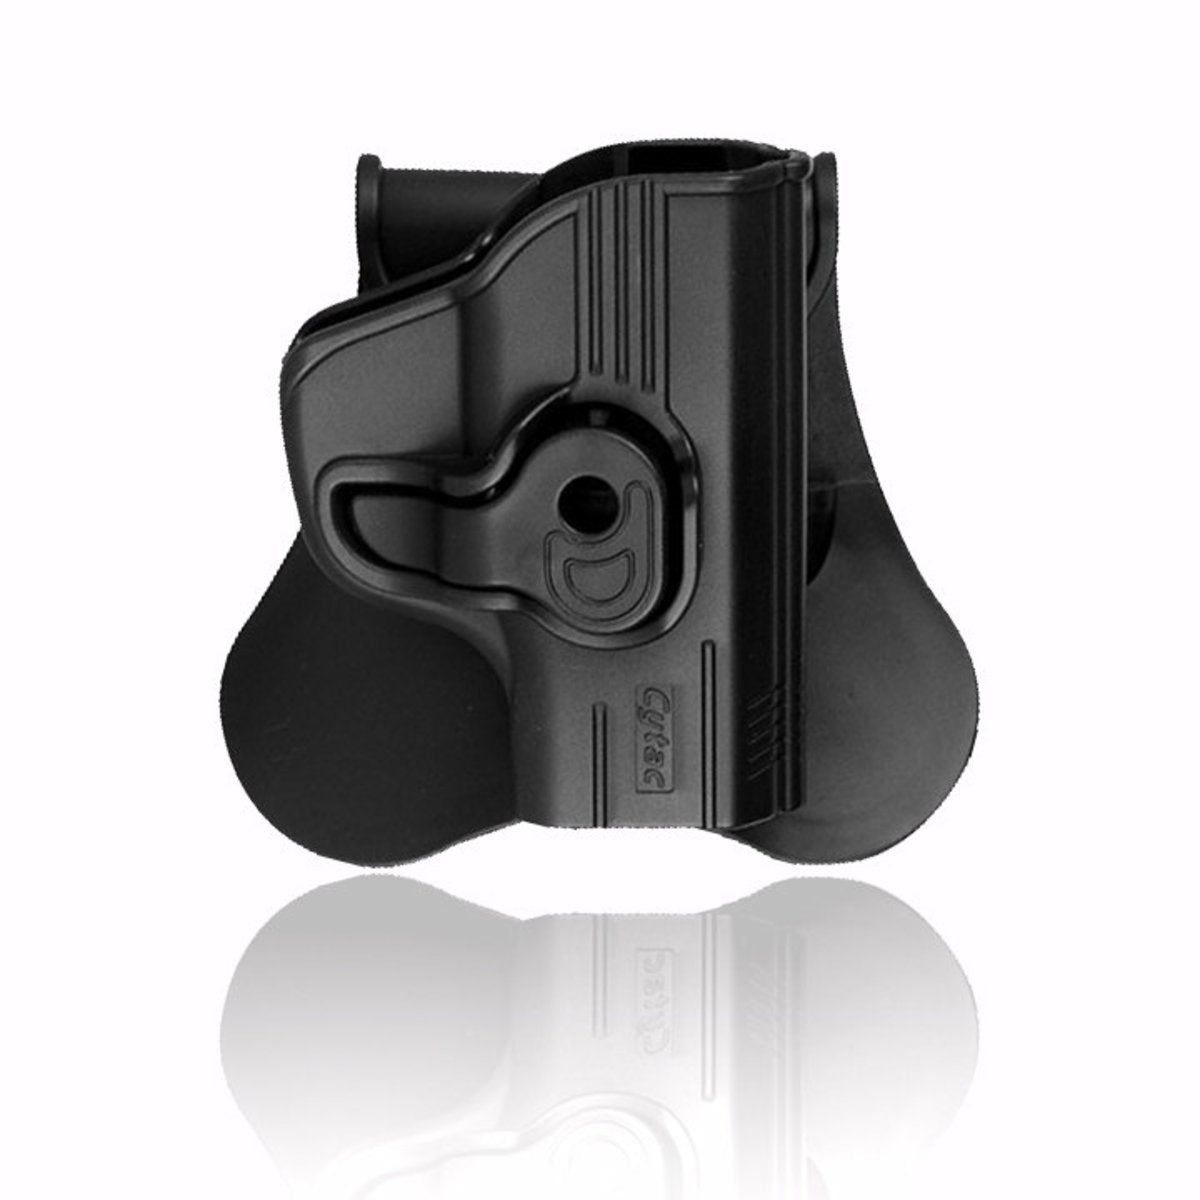 Cytac Owb Holster - Fits Ruger Lc-380, Lc-9